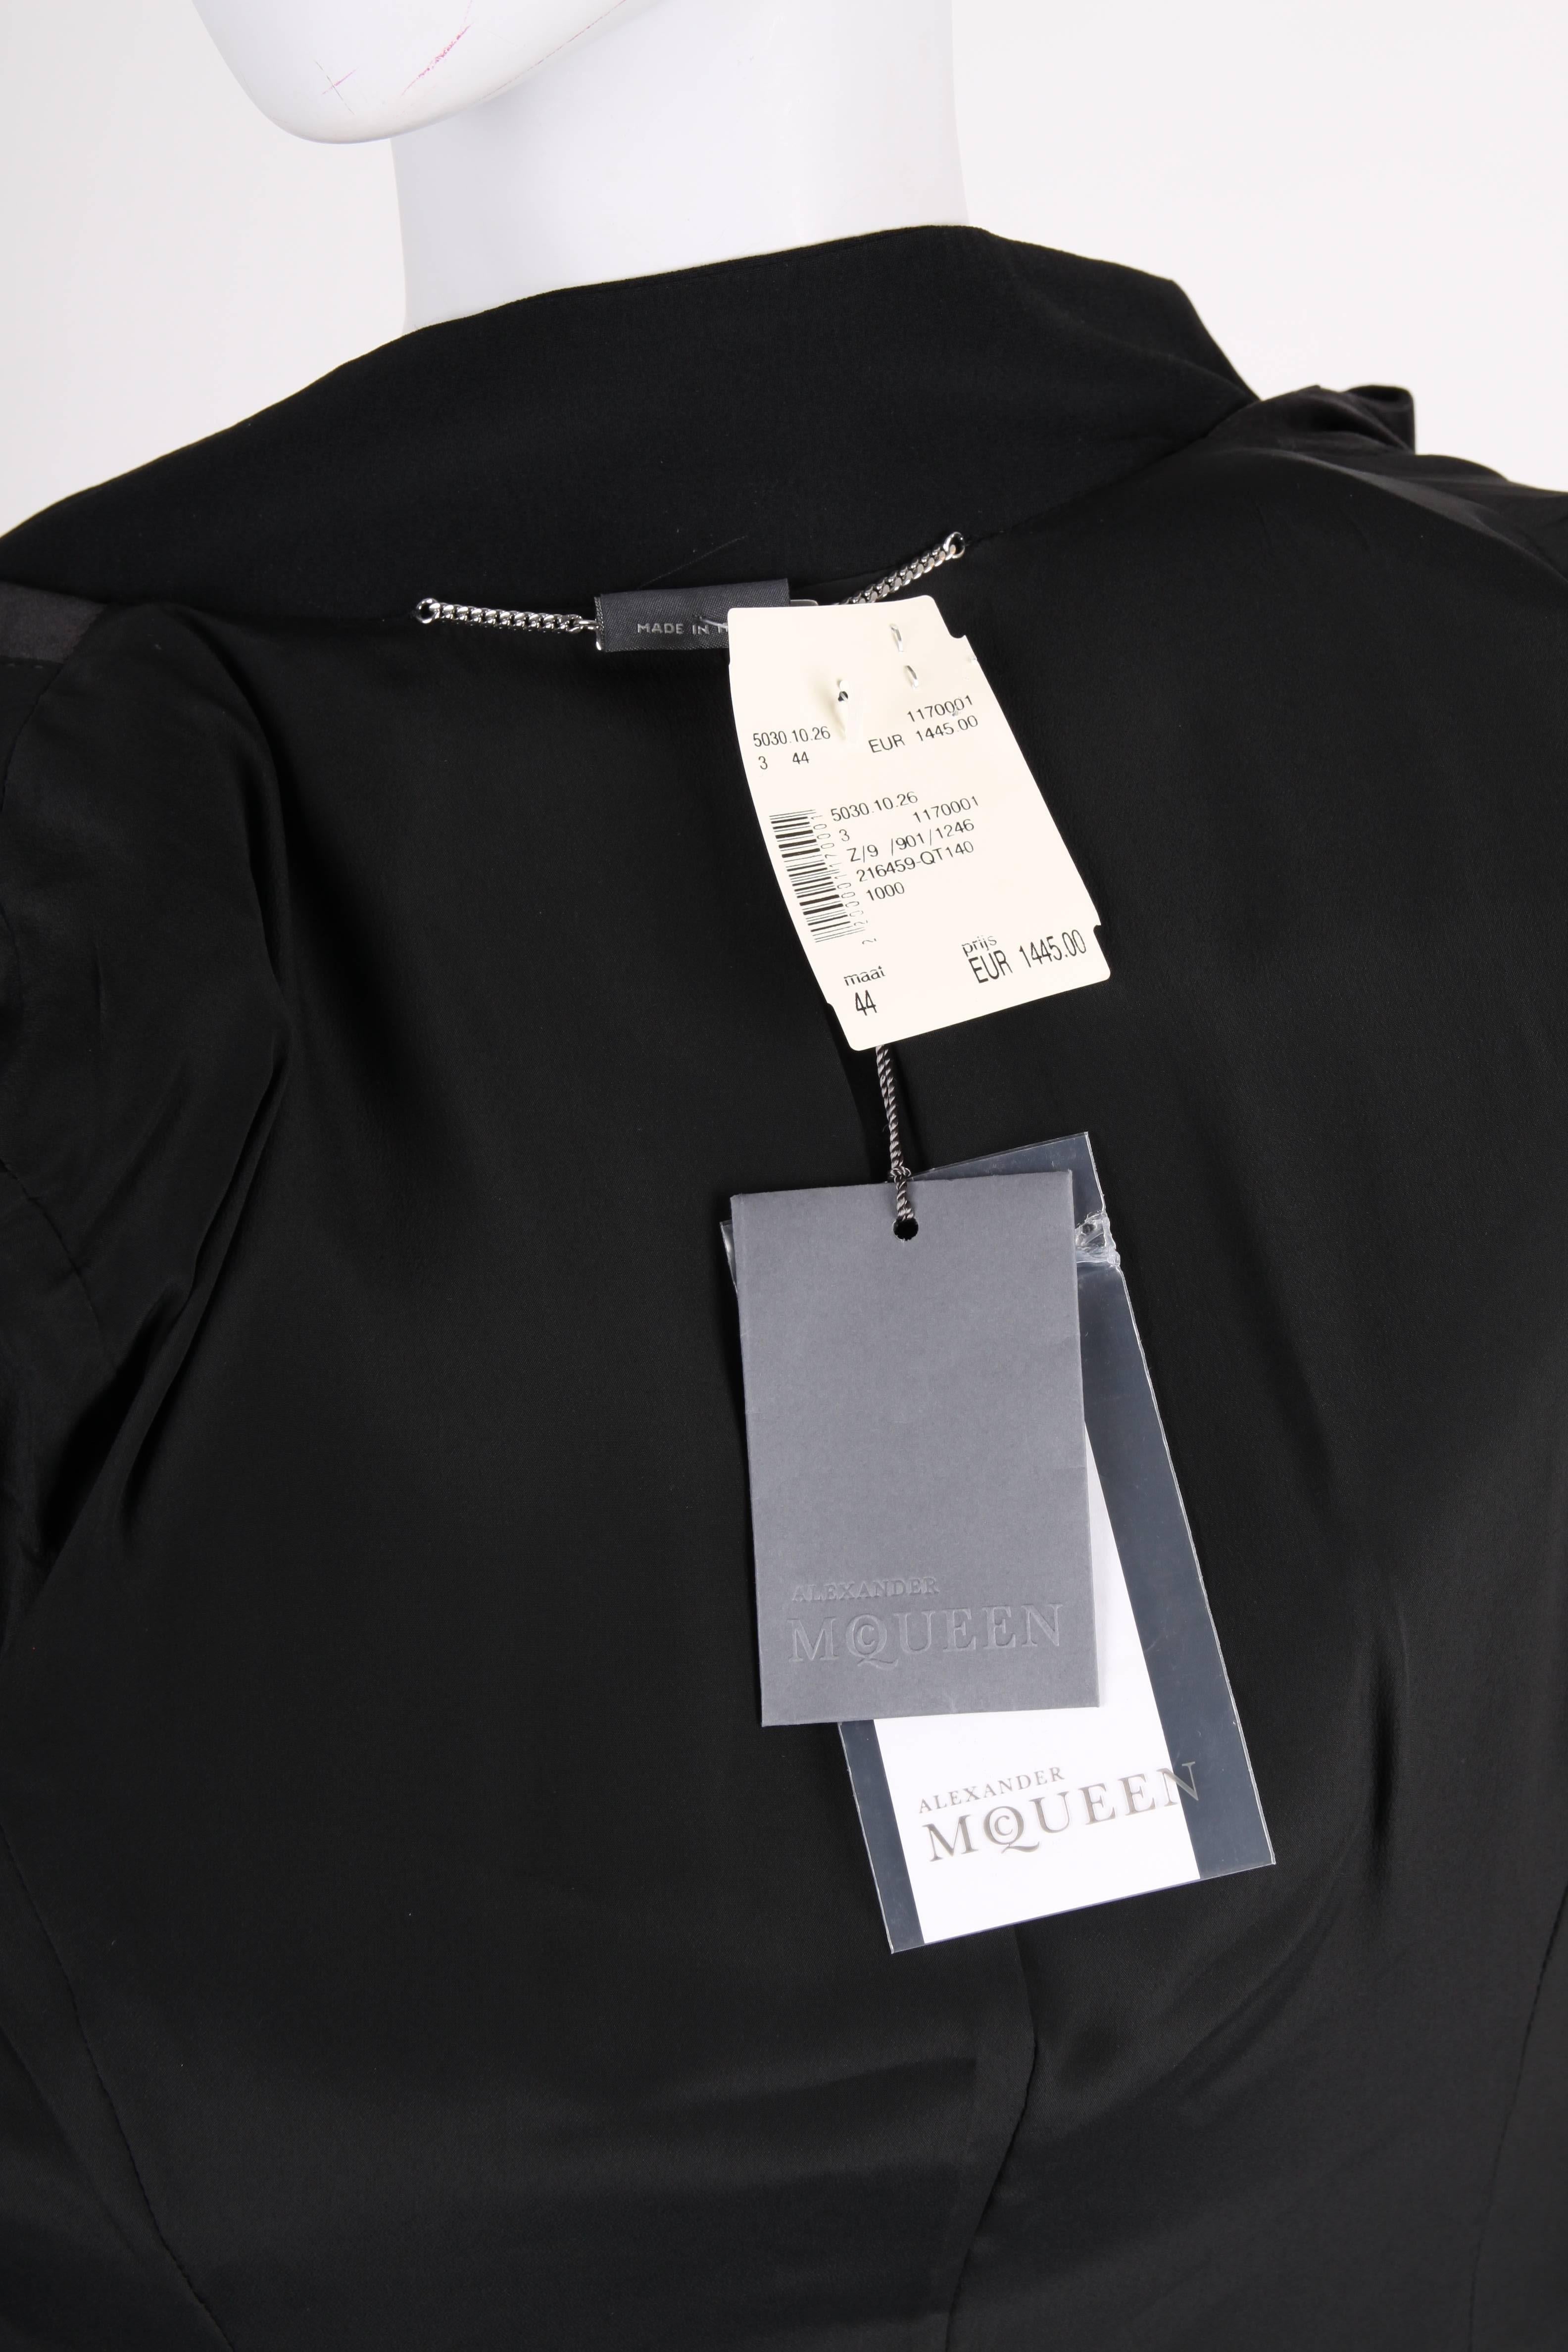 We have a winner!! When you don't know what to wear these holidays; this is it!!

A stunning dress by Alexander McQueen based on the design of a tuxedo. Straight shoulders with rather large padding, long sleeves with three buttons at the end,